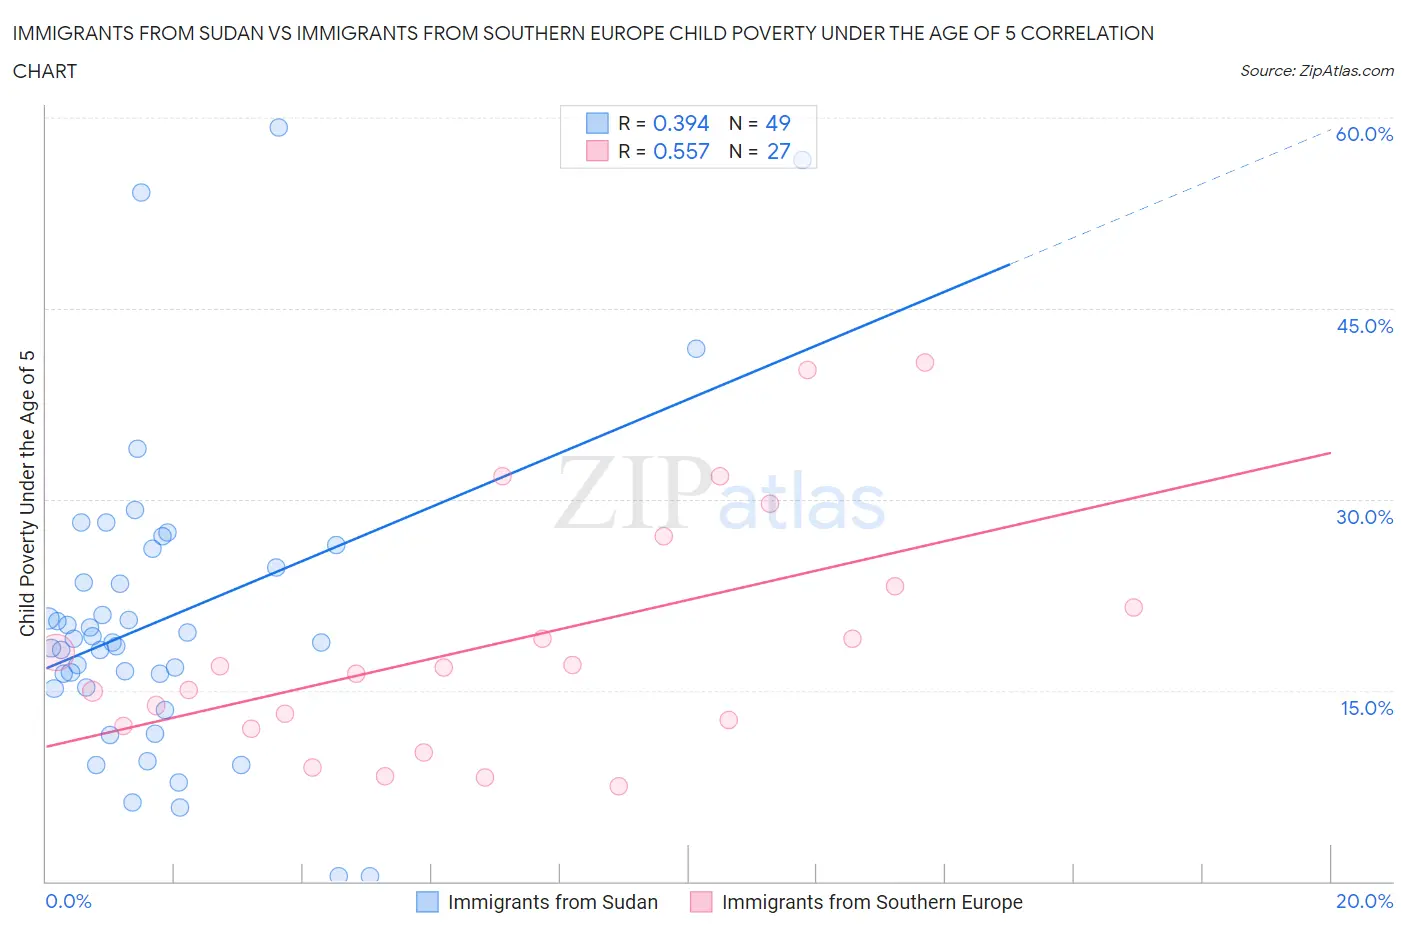 Immigrants from Sudan vs Immigrants from Southern Europe Child Poverty Under the Age of 5